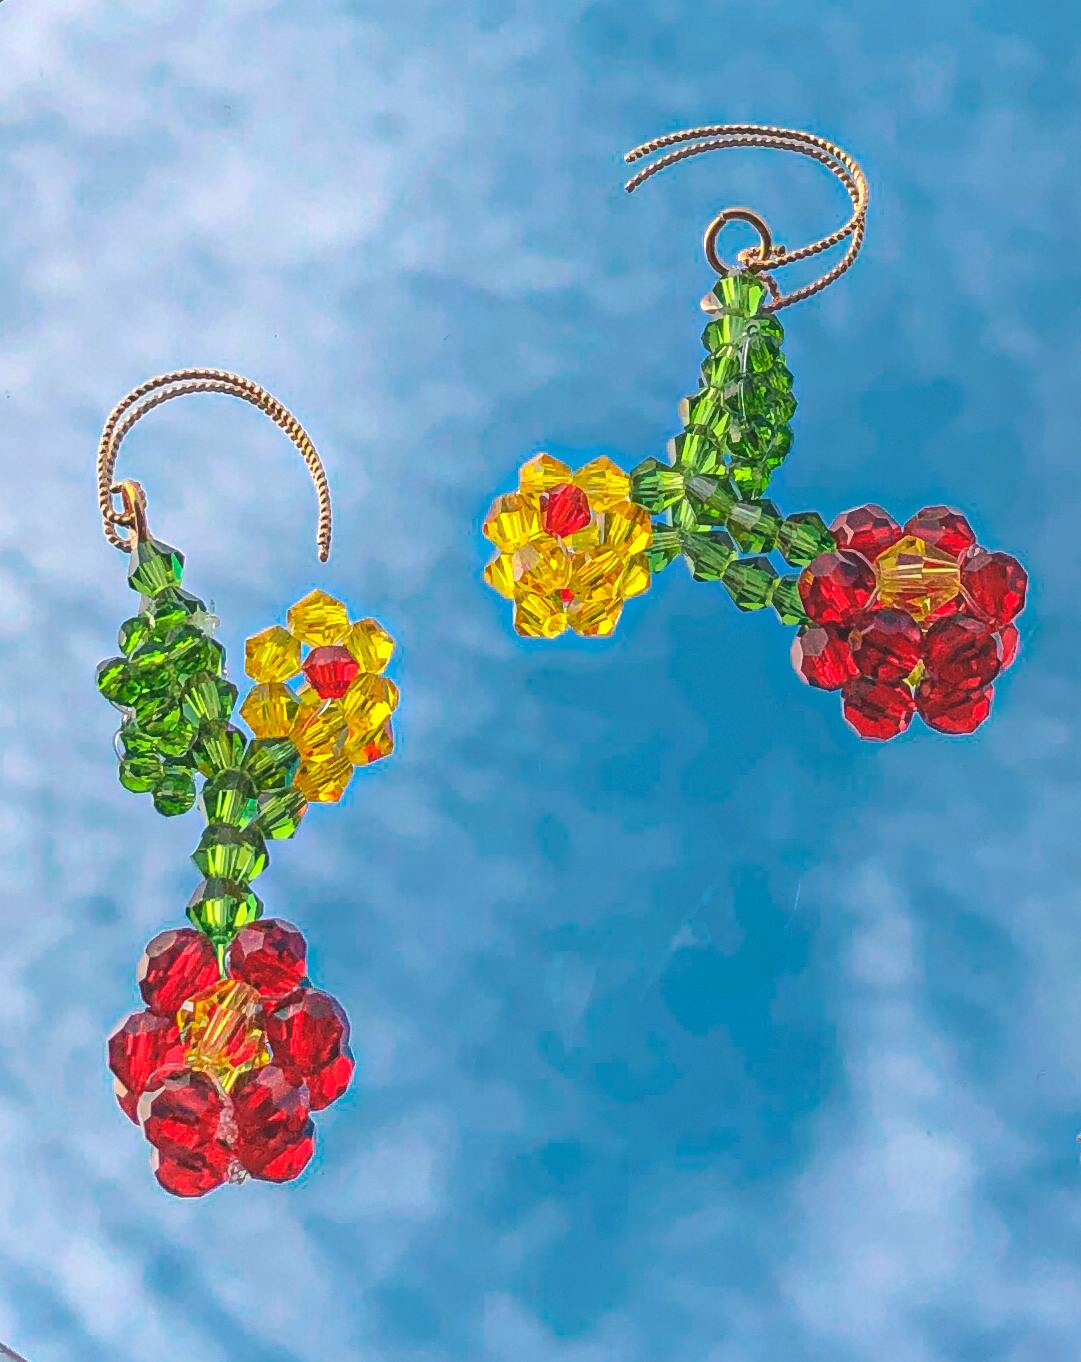 Paisely Beaded Flower Earrings by Veronique